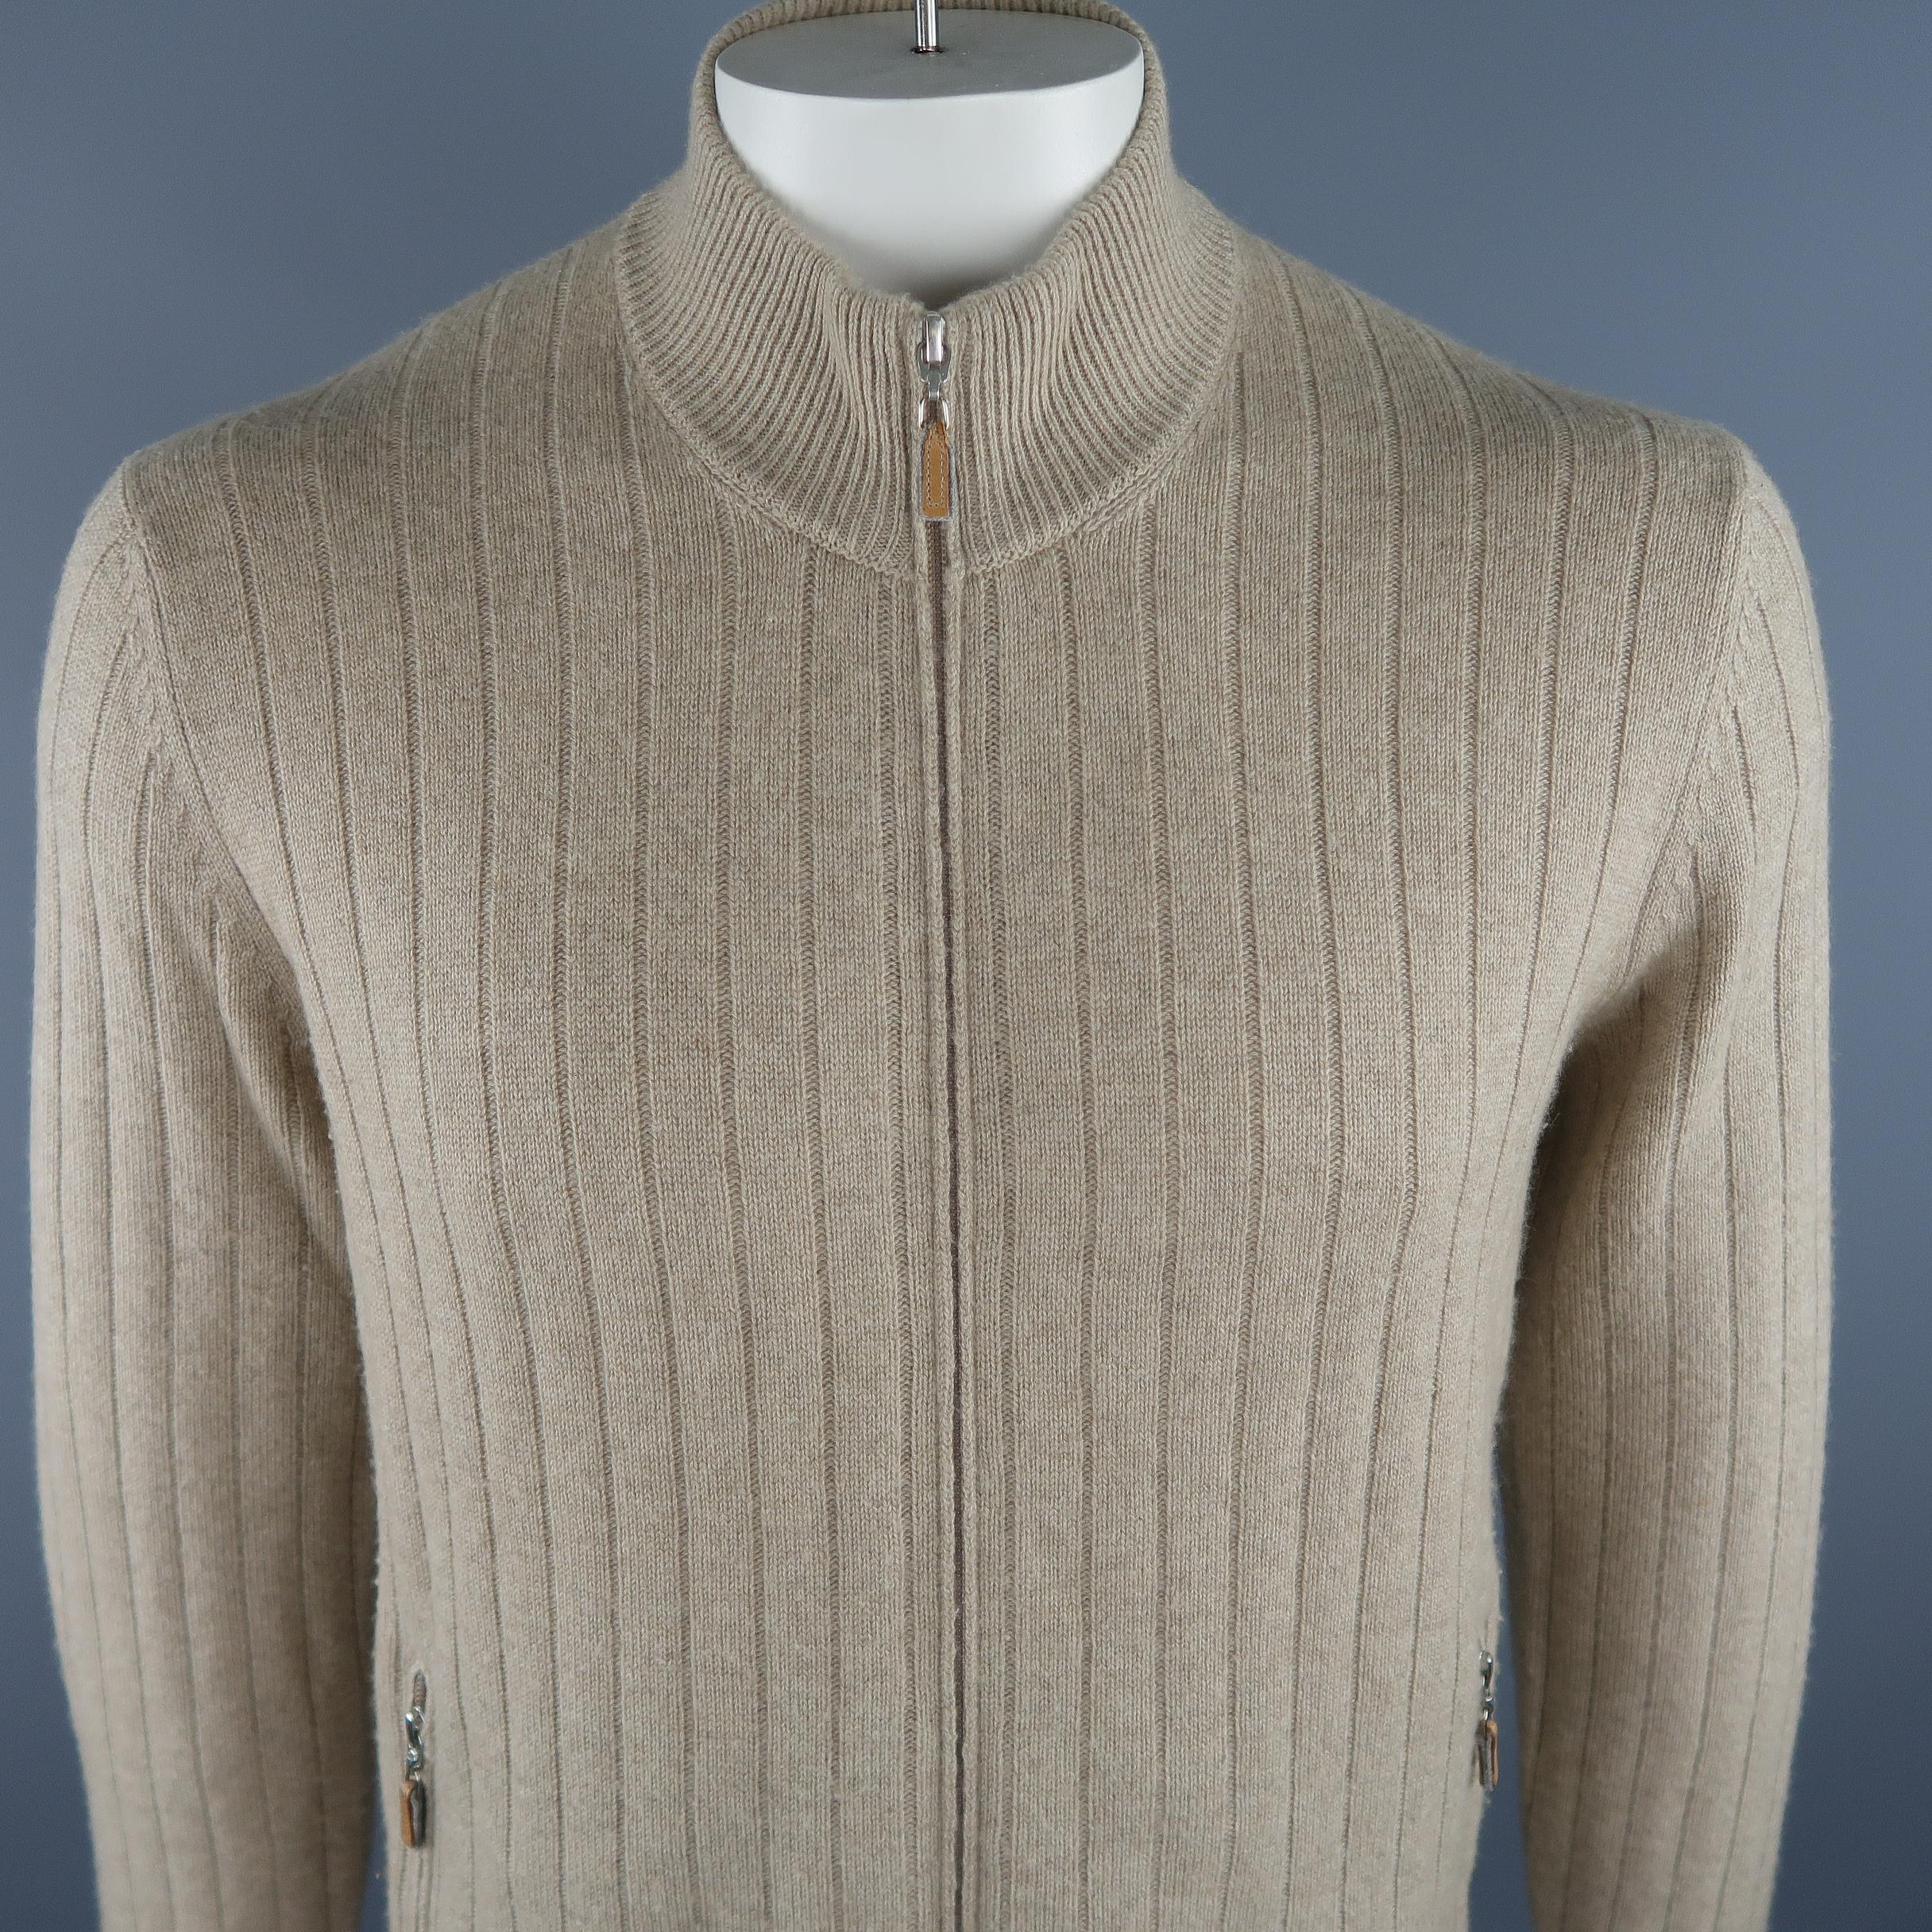 BRUNELLO CUCINELLI cardigan come in khaki tone in knitted cashmere material, with zip up front, front zip pockets, ribbed cuffs and waistband. Made in Italy.
 
Excellent Pre-Owned Condition.
Marked: 52 IT
 
Measurements:
 
Shoulder: 17.5 in.
Chest: